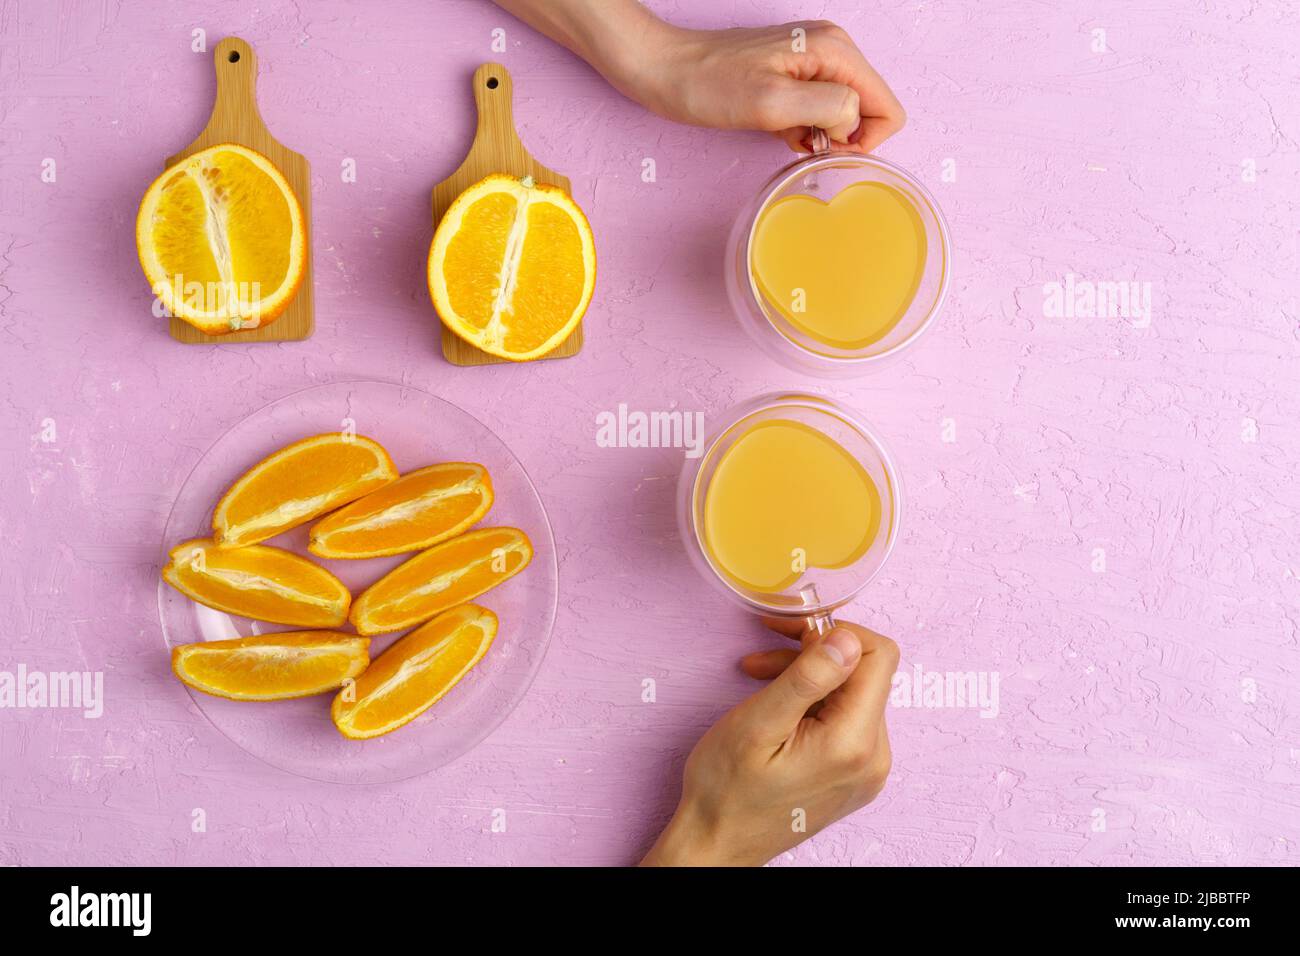 Fresh orange juice in glass and oranges on a pink colored background. Top view. Stock Photo